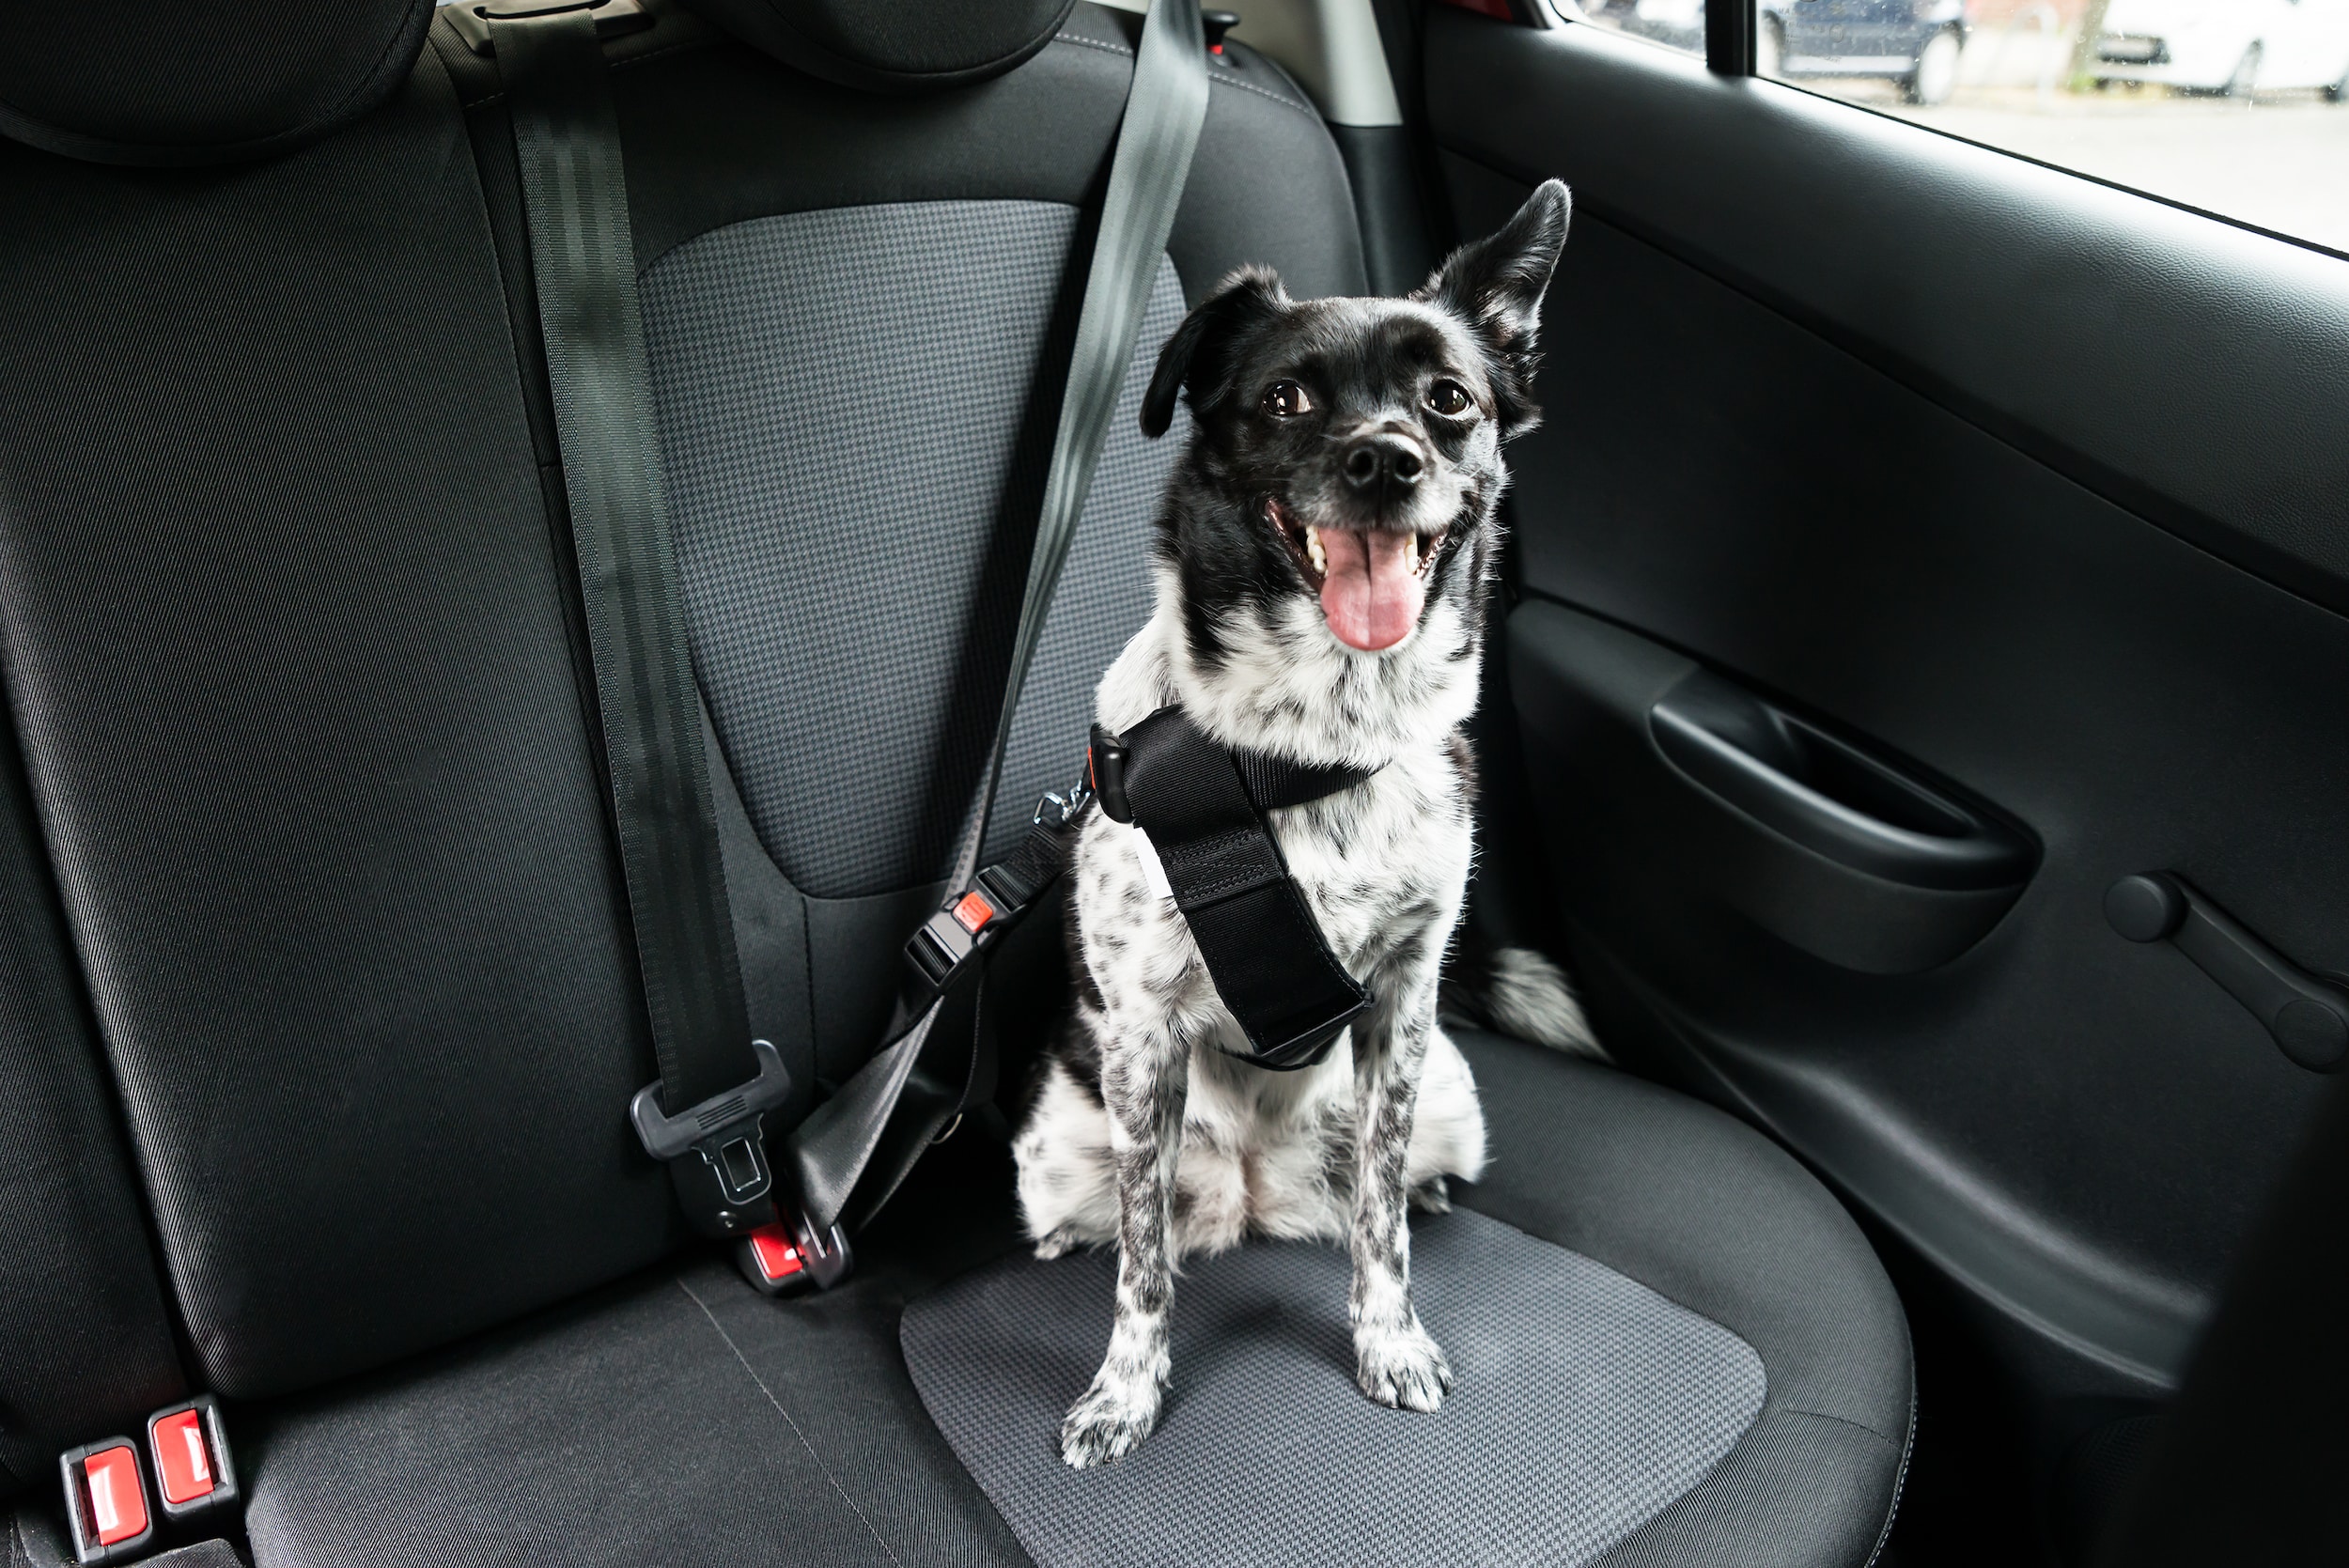 Where Should a Dog Sit in a SUV? Ultimate Safety Guide